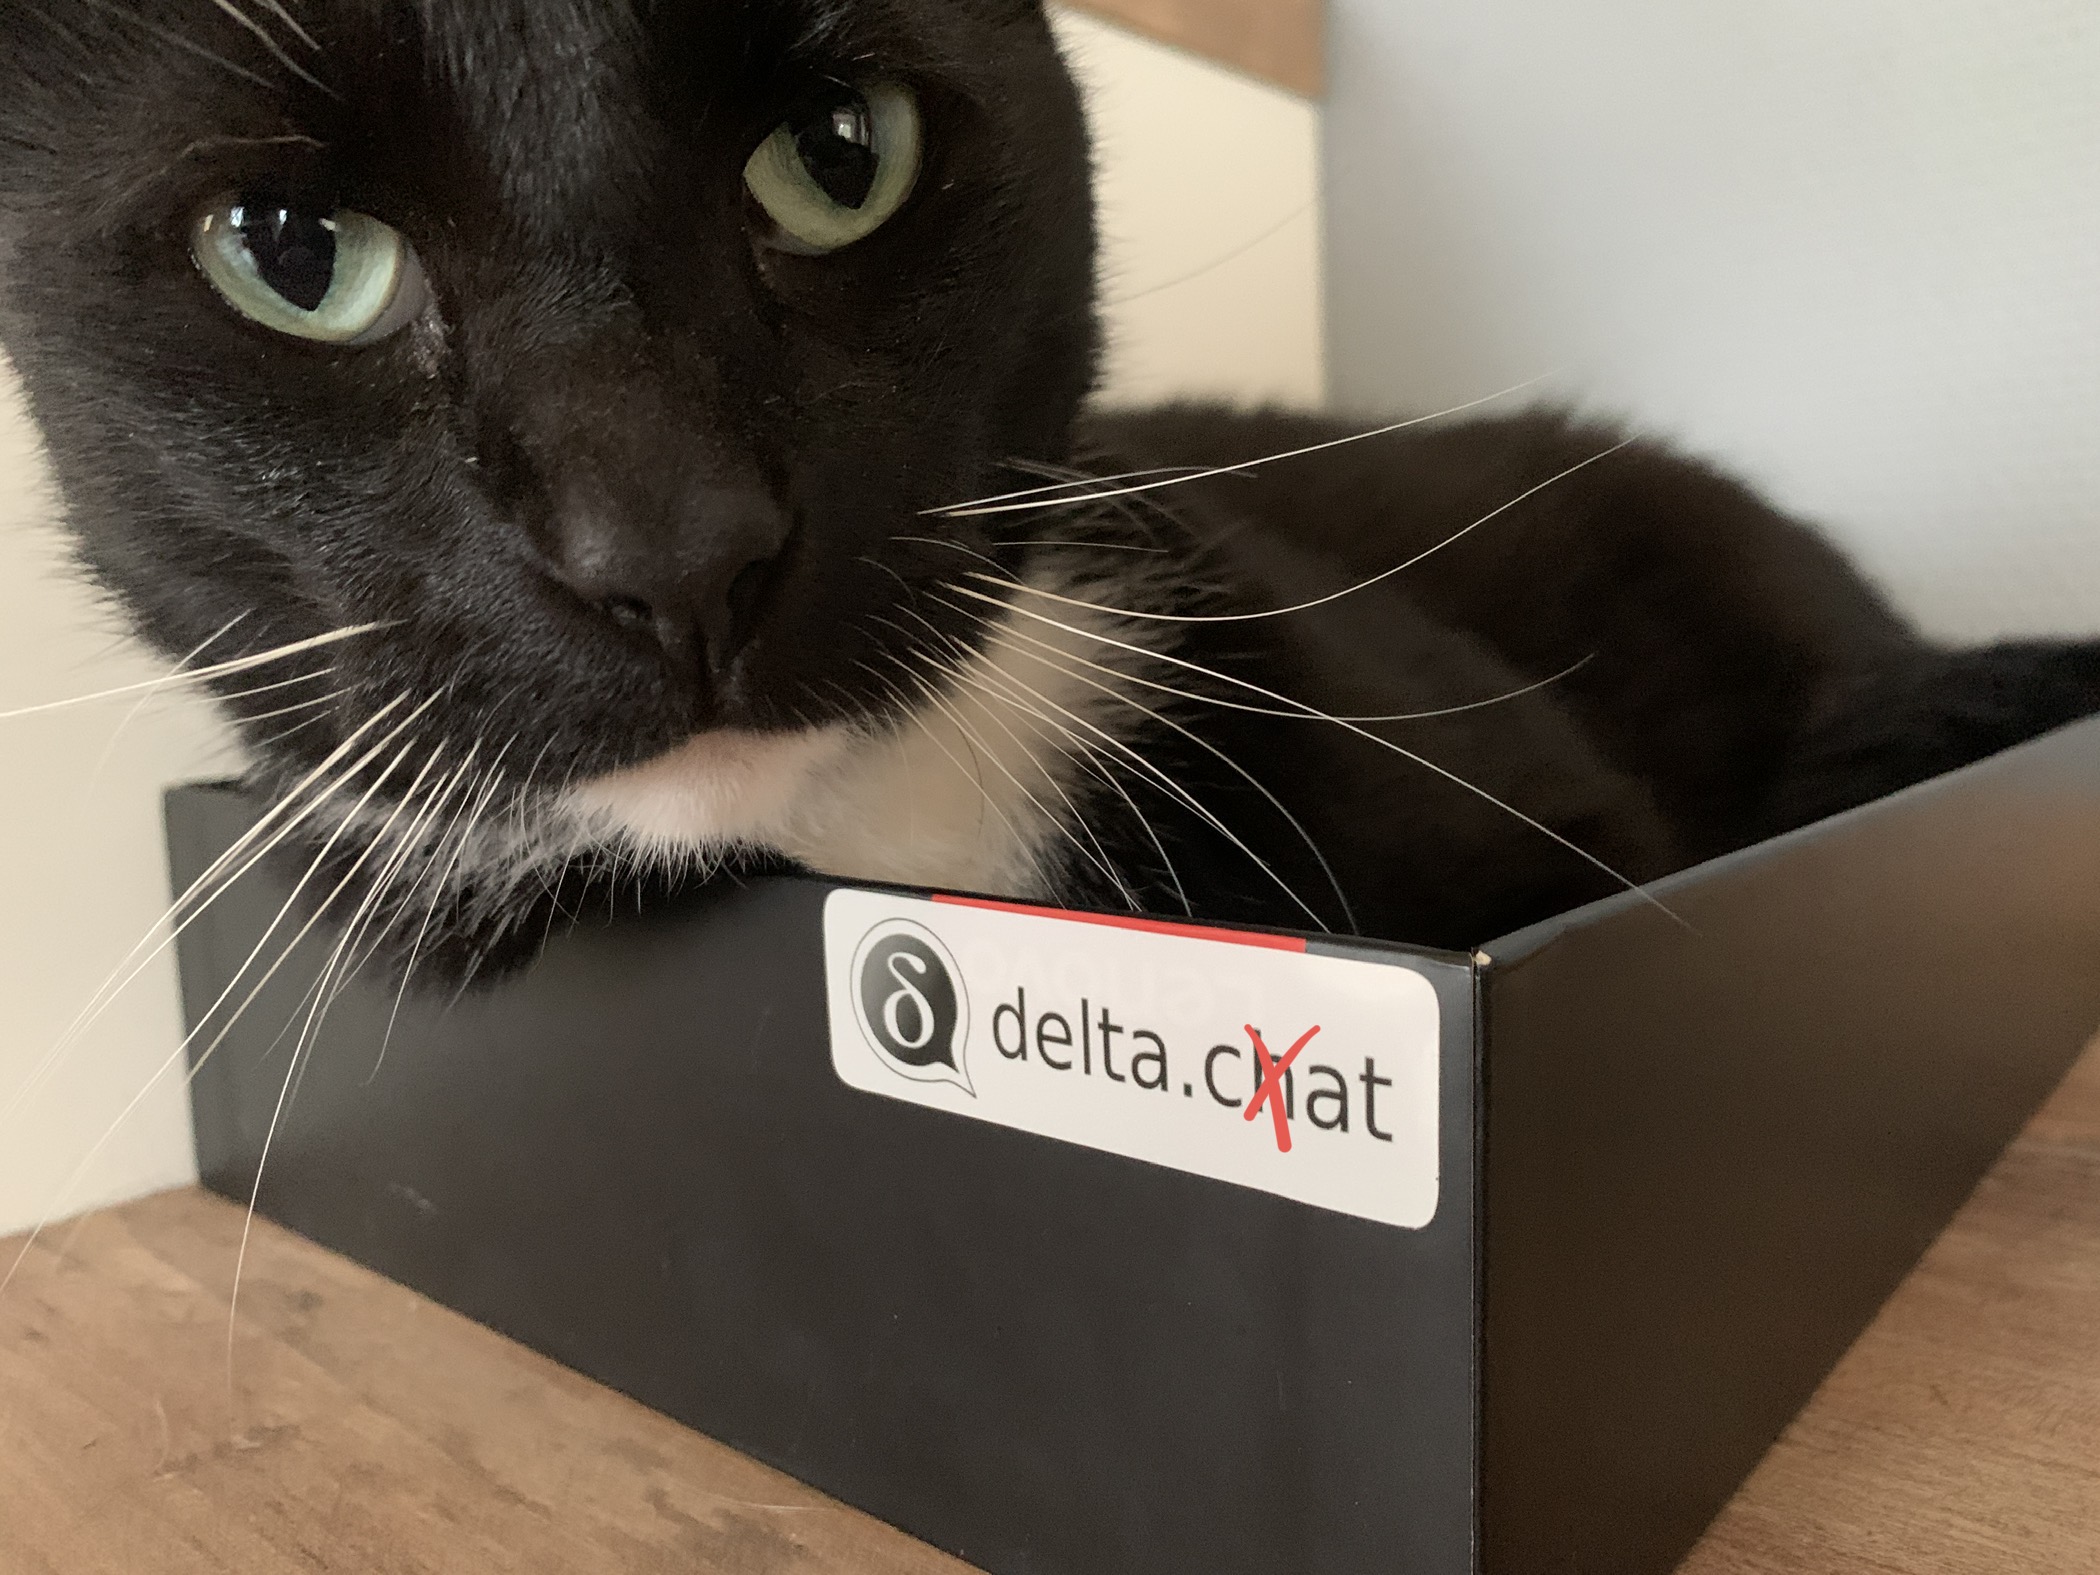 Beautiful Cat with Delta Chat sticker